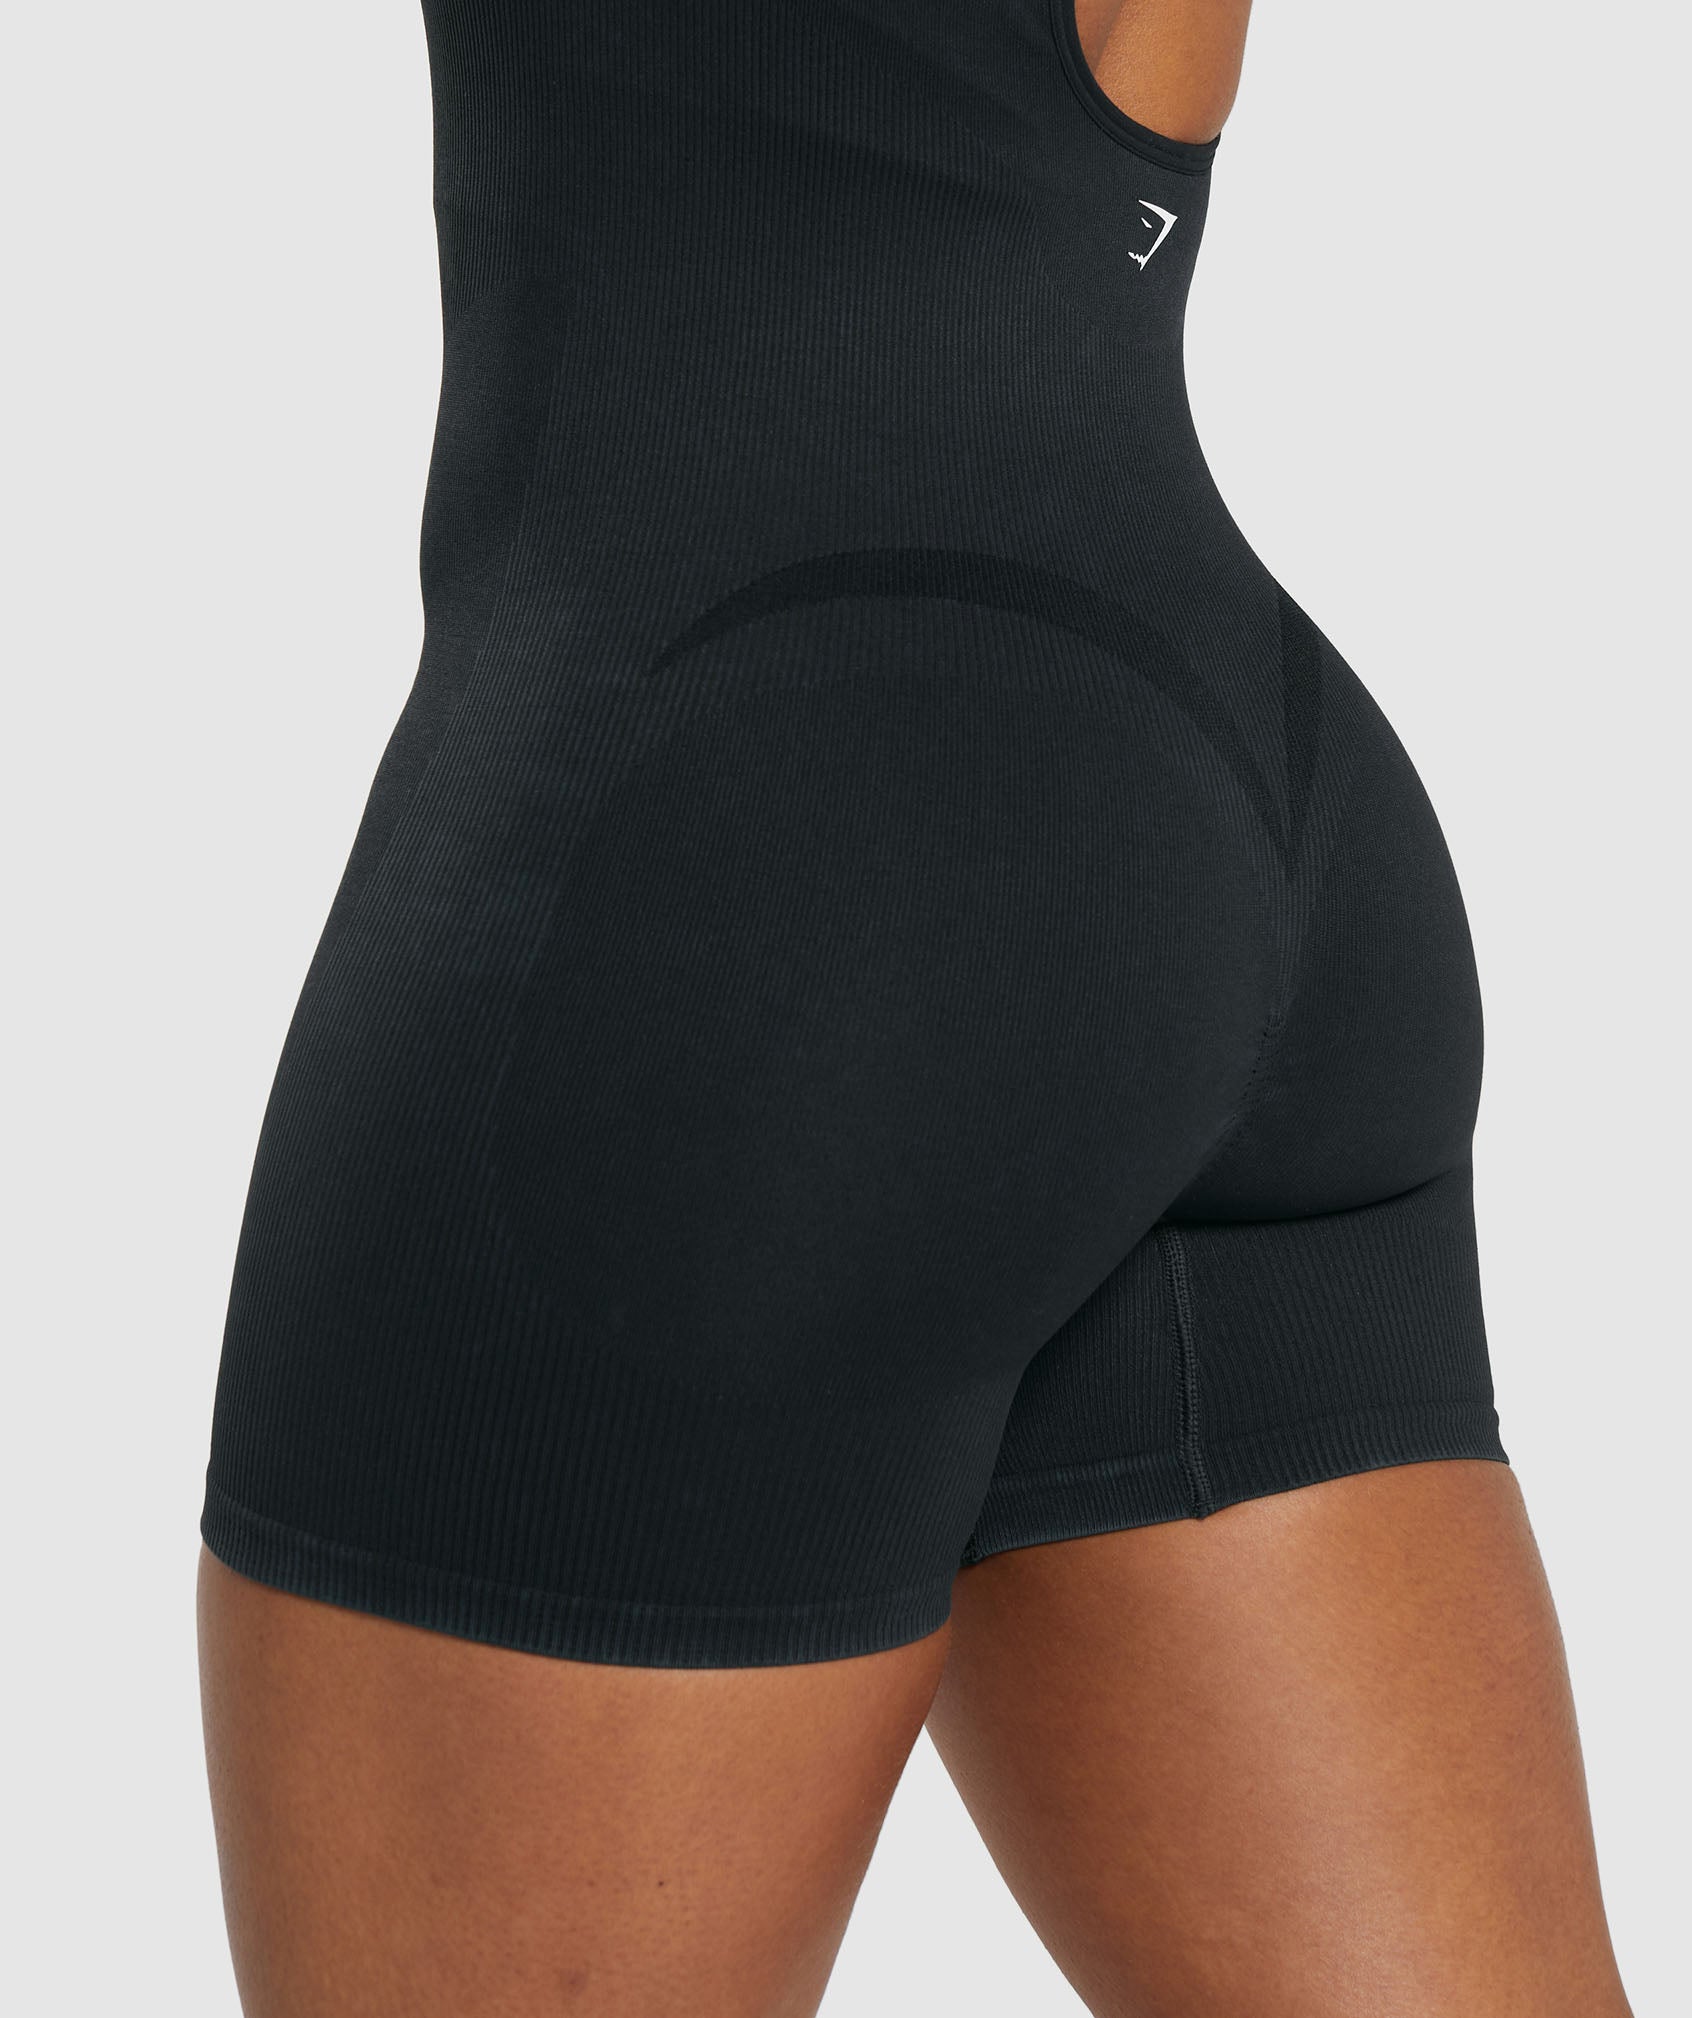 Gains Seamless All-In-One in Black - view 5